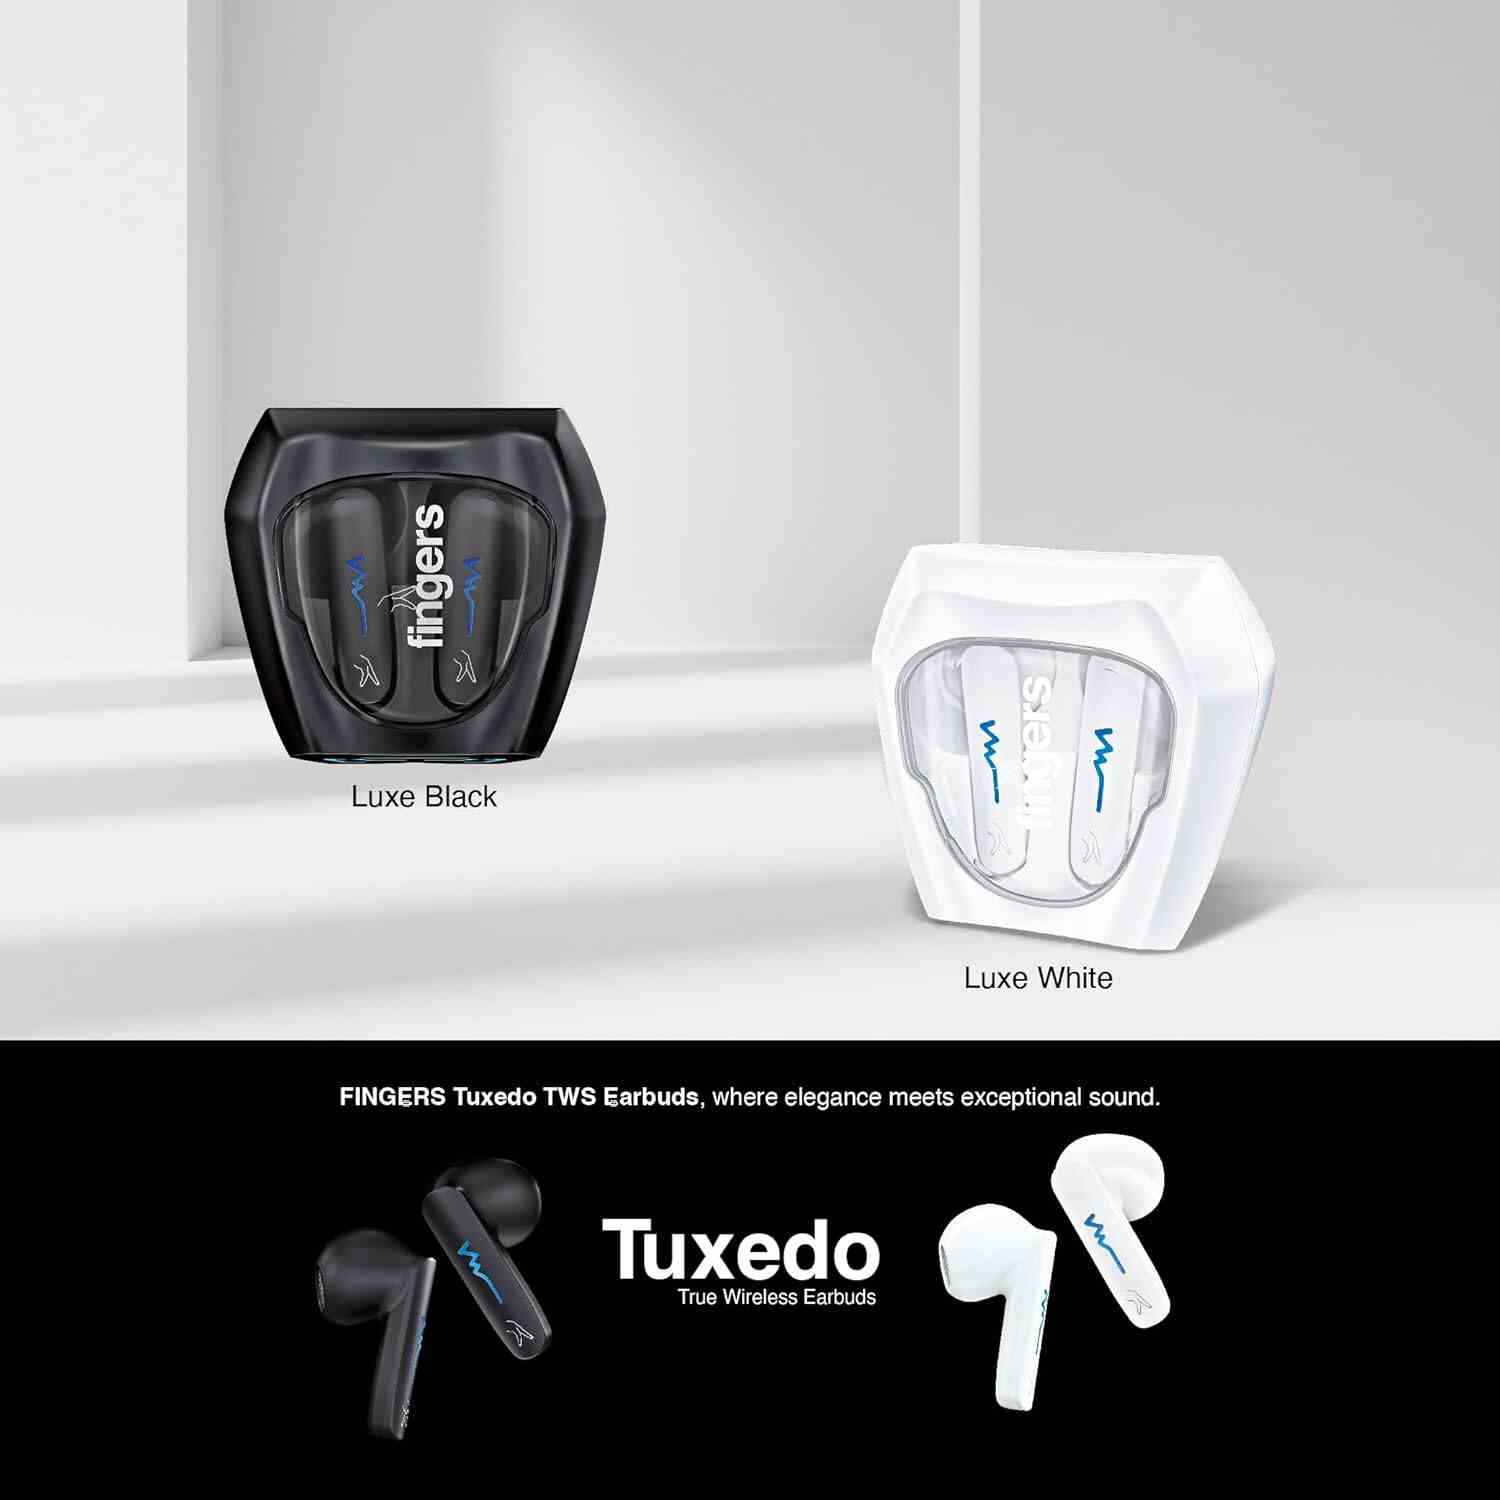 FINGERS Tuxedo TWS Earbuds with 32-Hour Playtime, Fast Charging, 13mm Neodymium Drivers, Surround Noise Cancellation (SNC Technology) Built-in Mic, IPX4 Sweat Resistant, Voice Assistant (Luxe White)